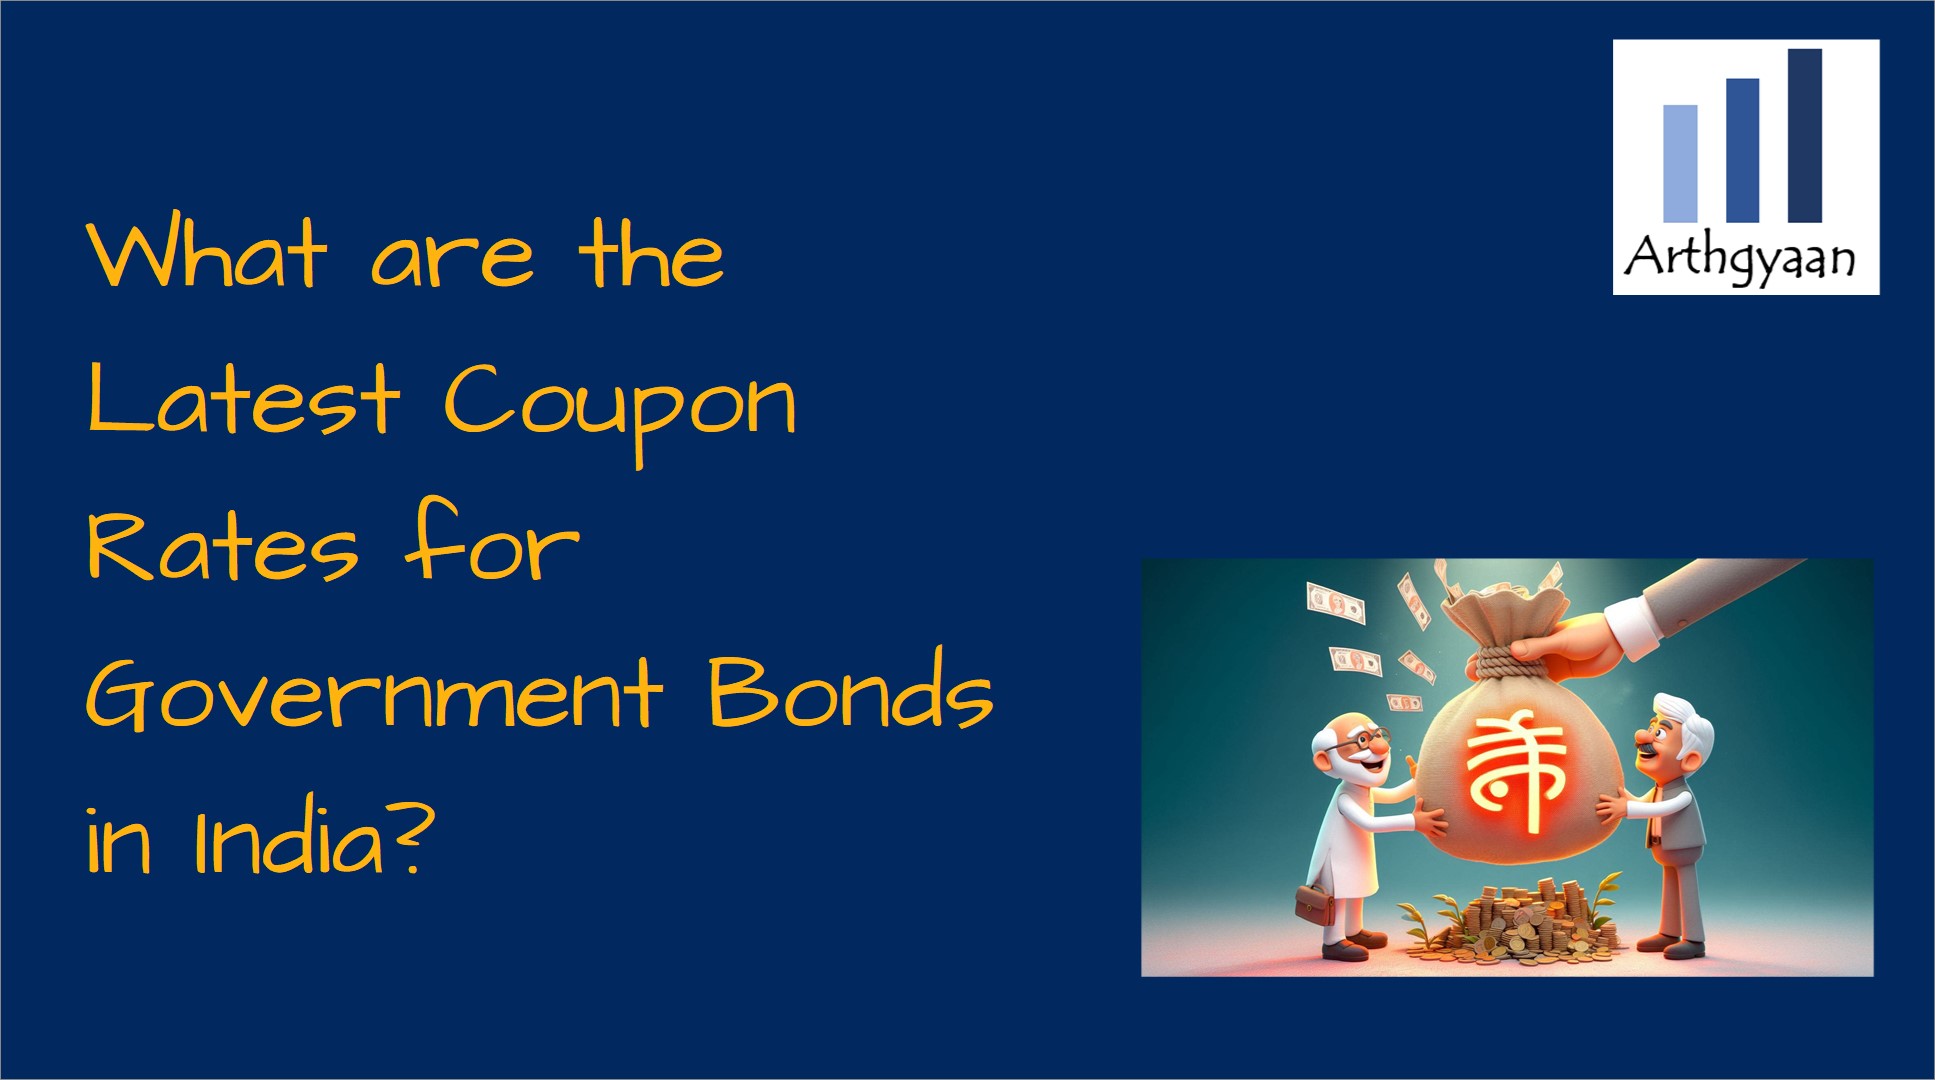 What are the Latest Coupon Rates for Government Bonds in India?